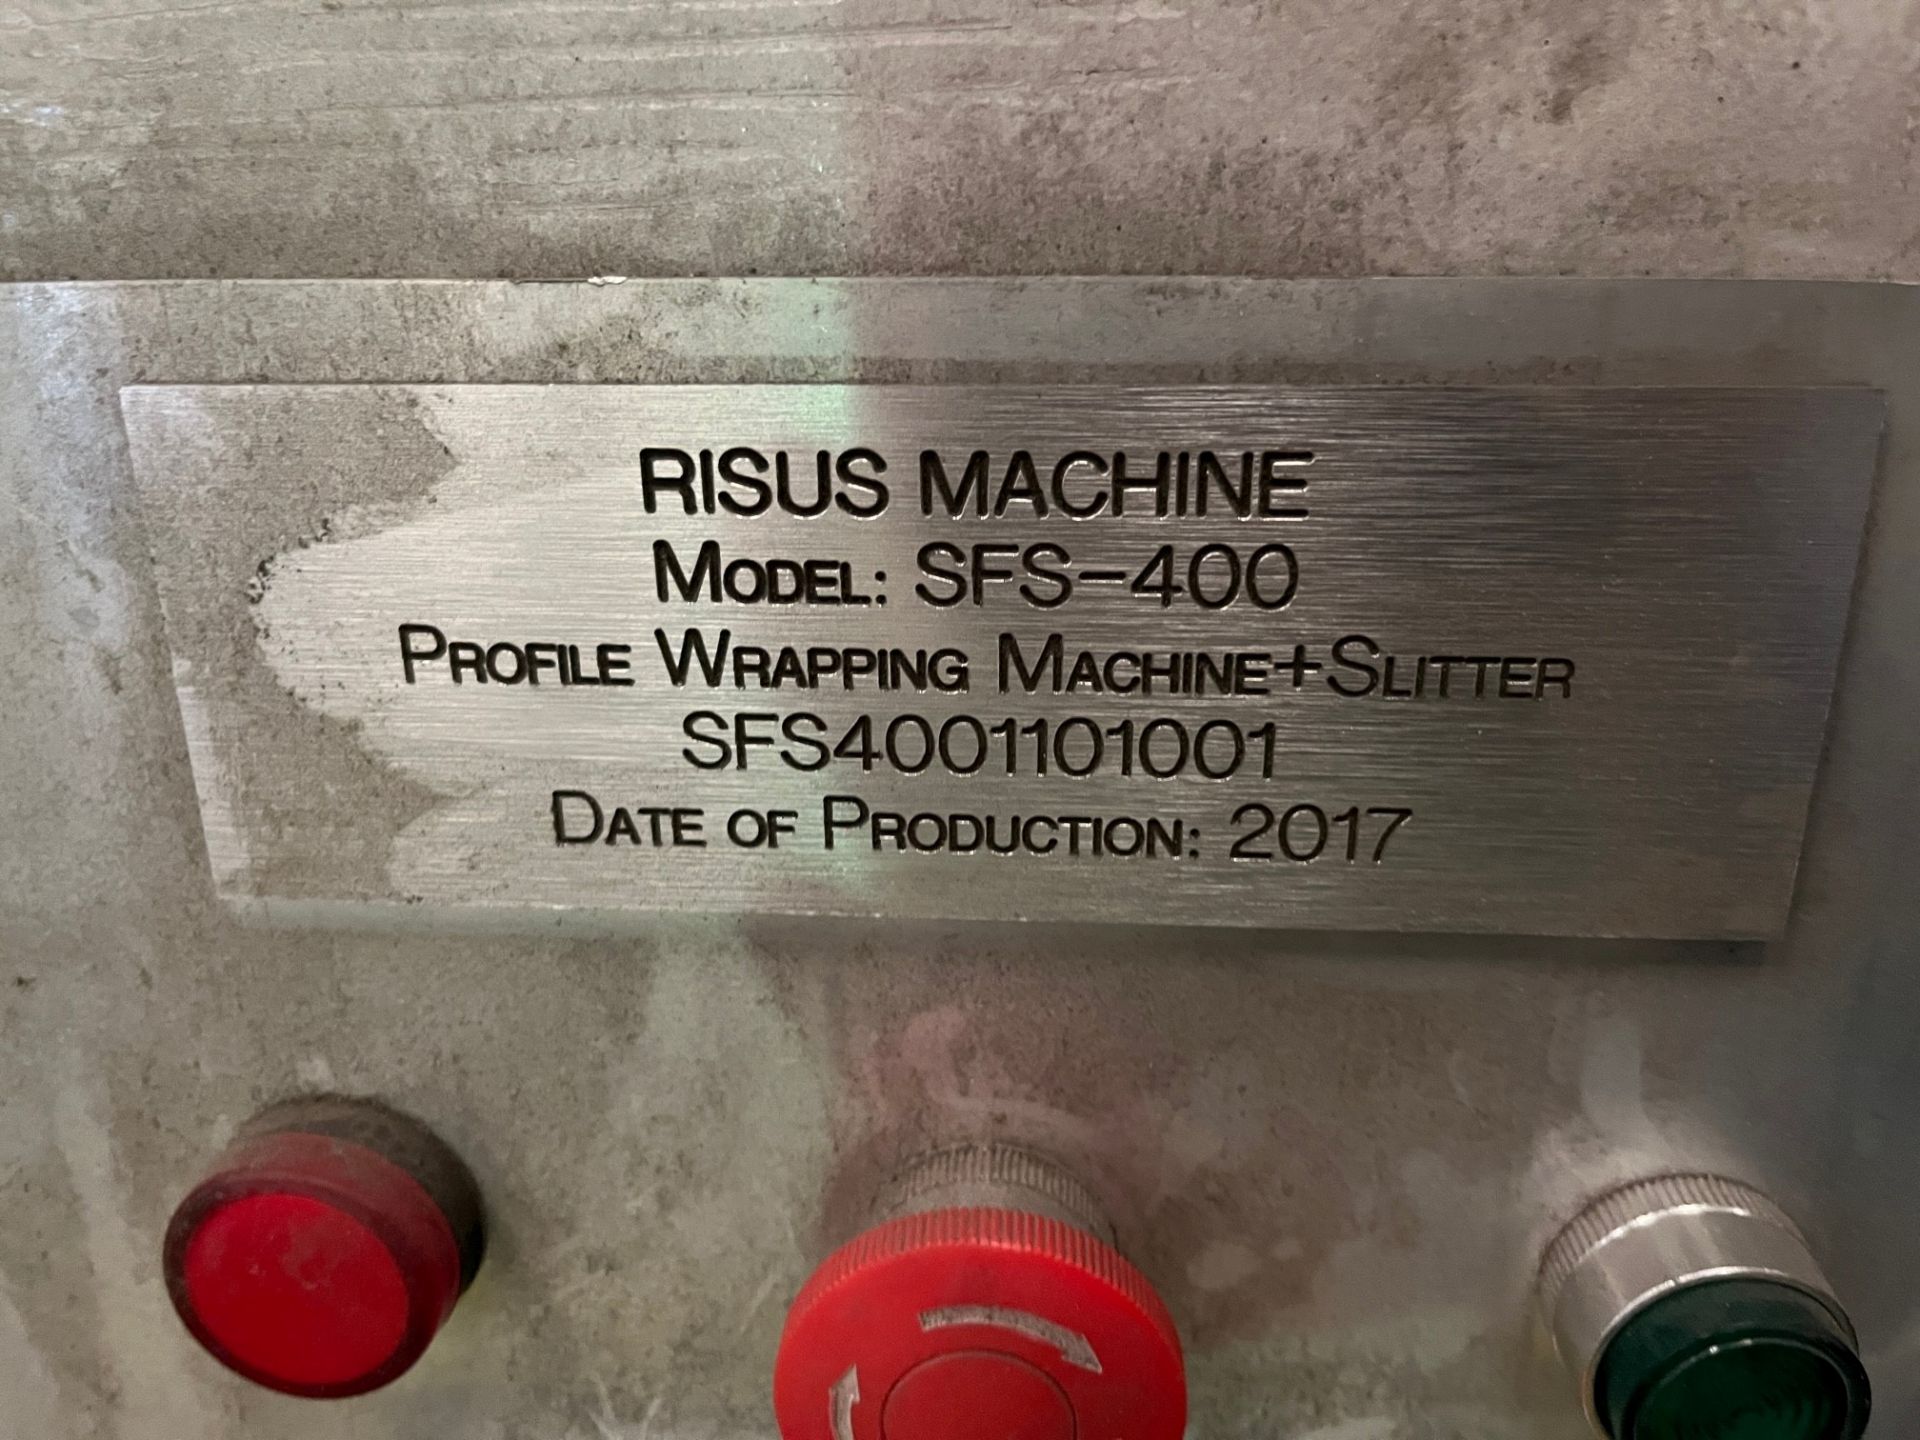 Risus SFS-400 Profile Wrapping Machine and Slitter - Image 2 of 2